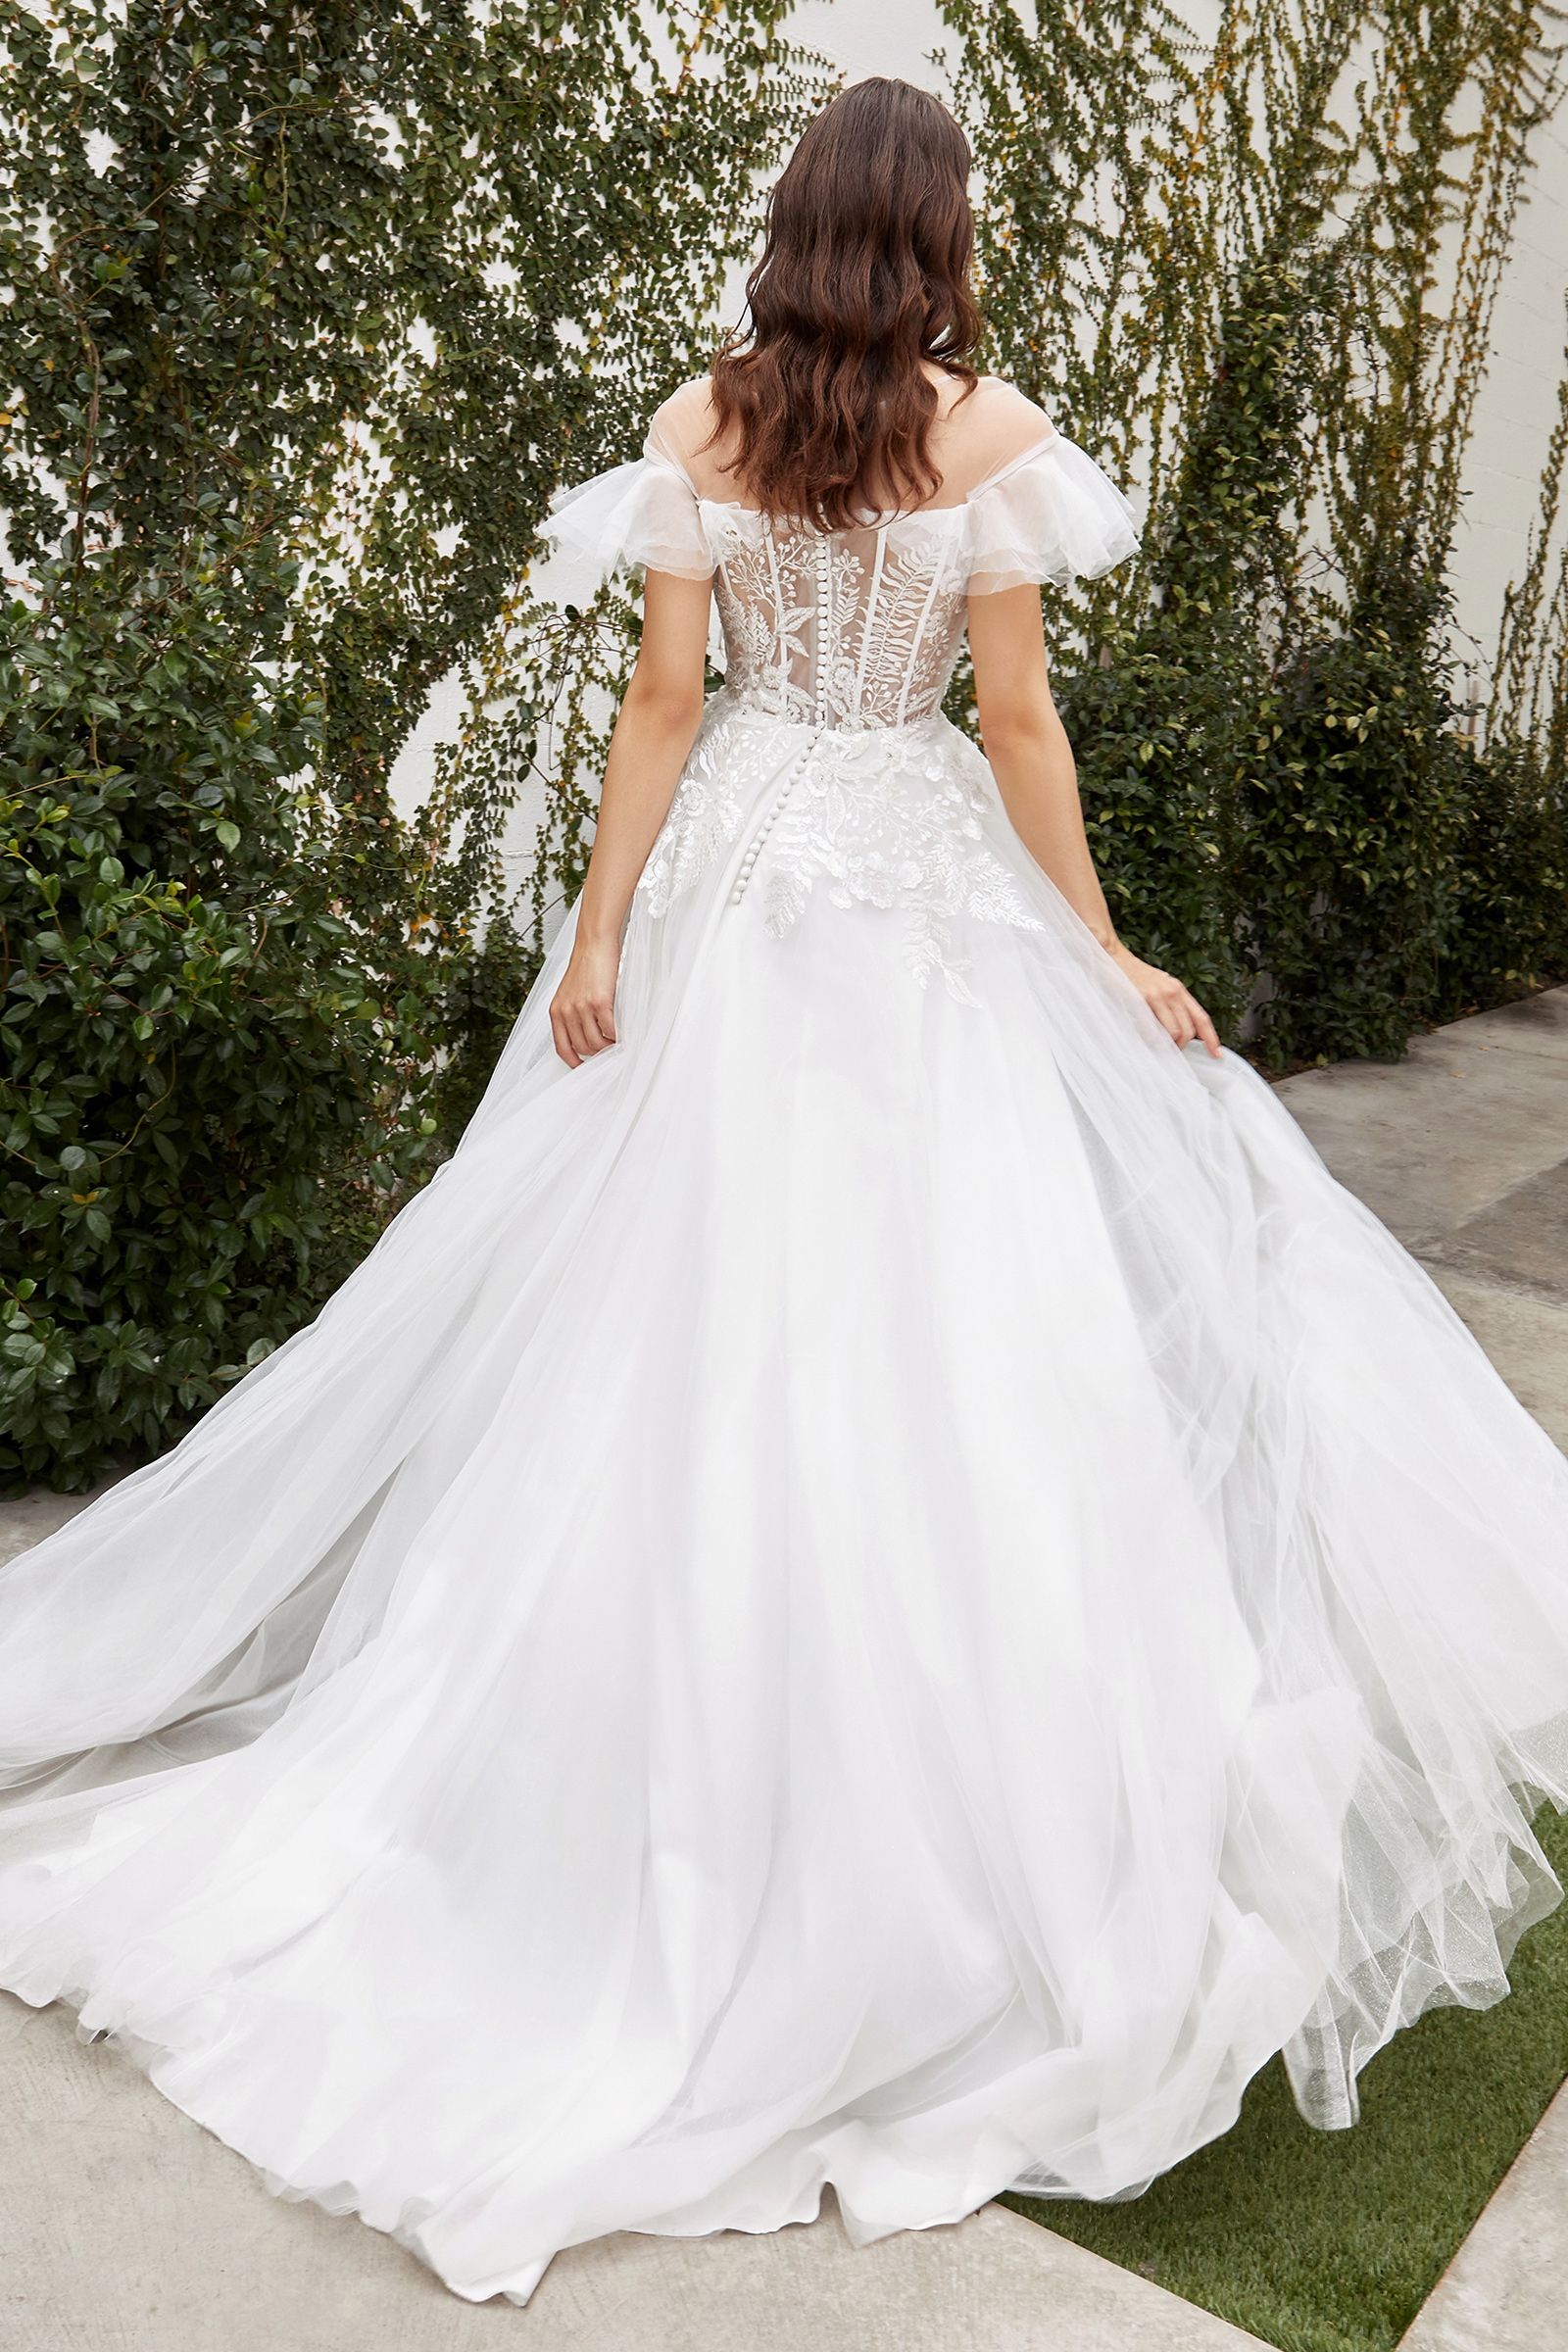 Sumptuous gathered tulle bridal gown with a flattering silhouette and sheer boned corset for extra support